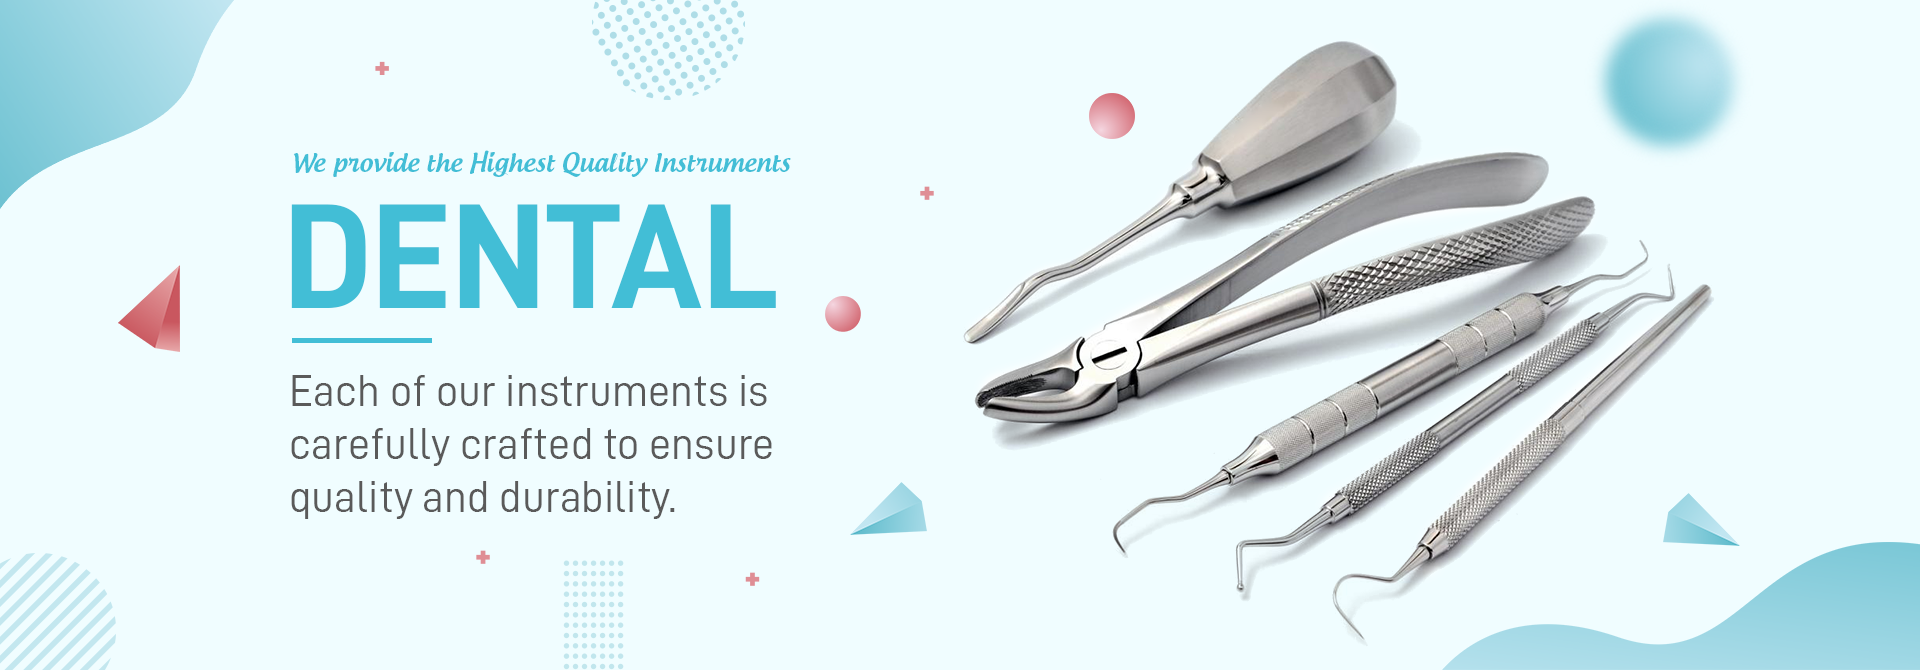 Make Your Next Surgical & Dental Instrument Purchase with Confidence Choose a CPECB Verified Manufacturer